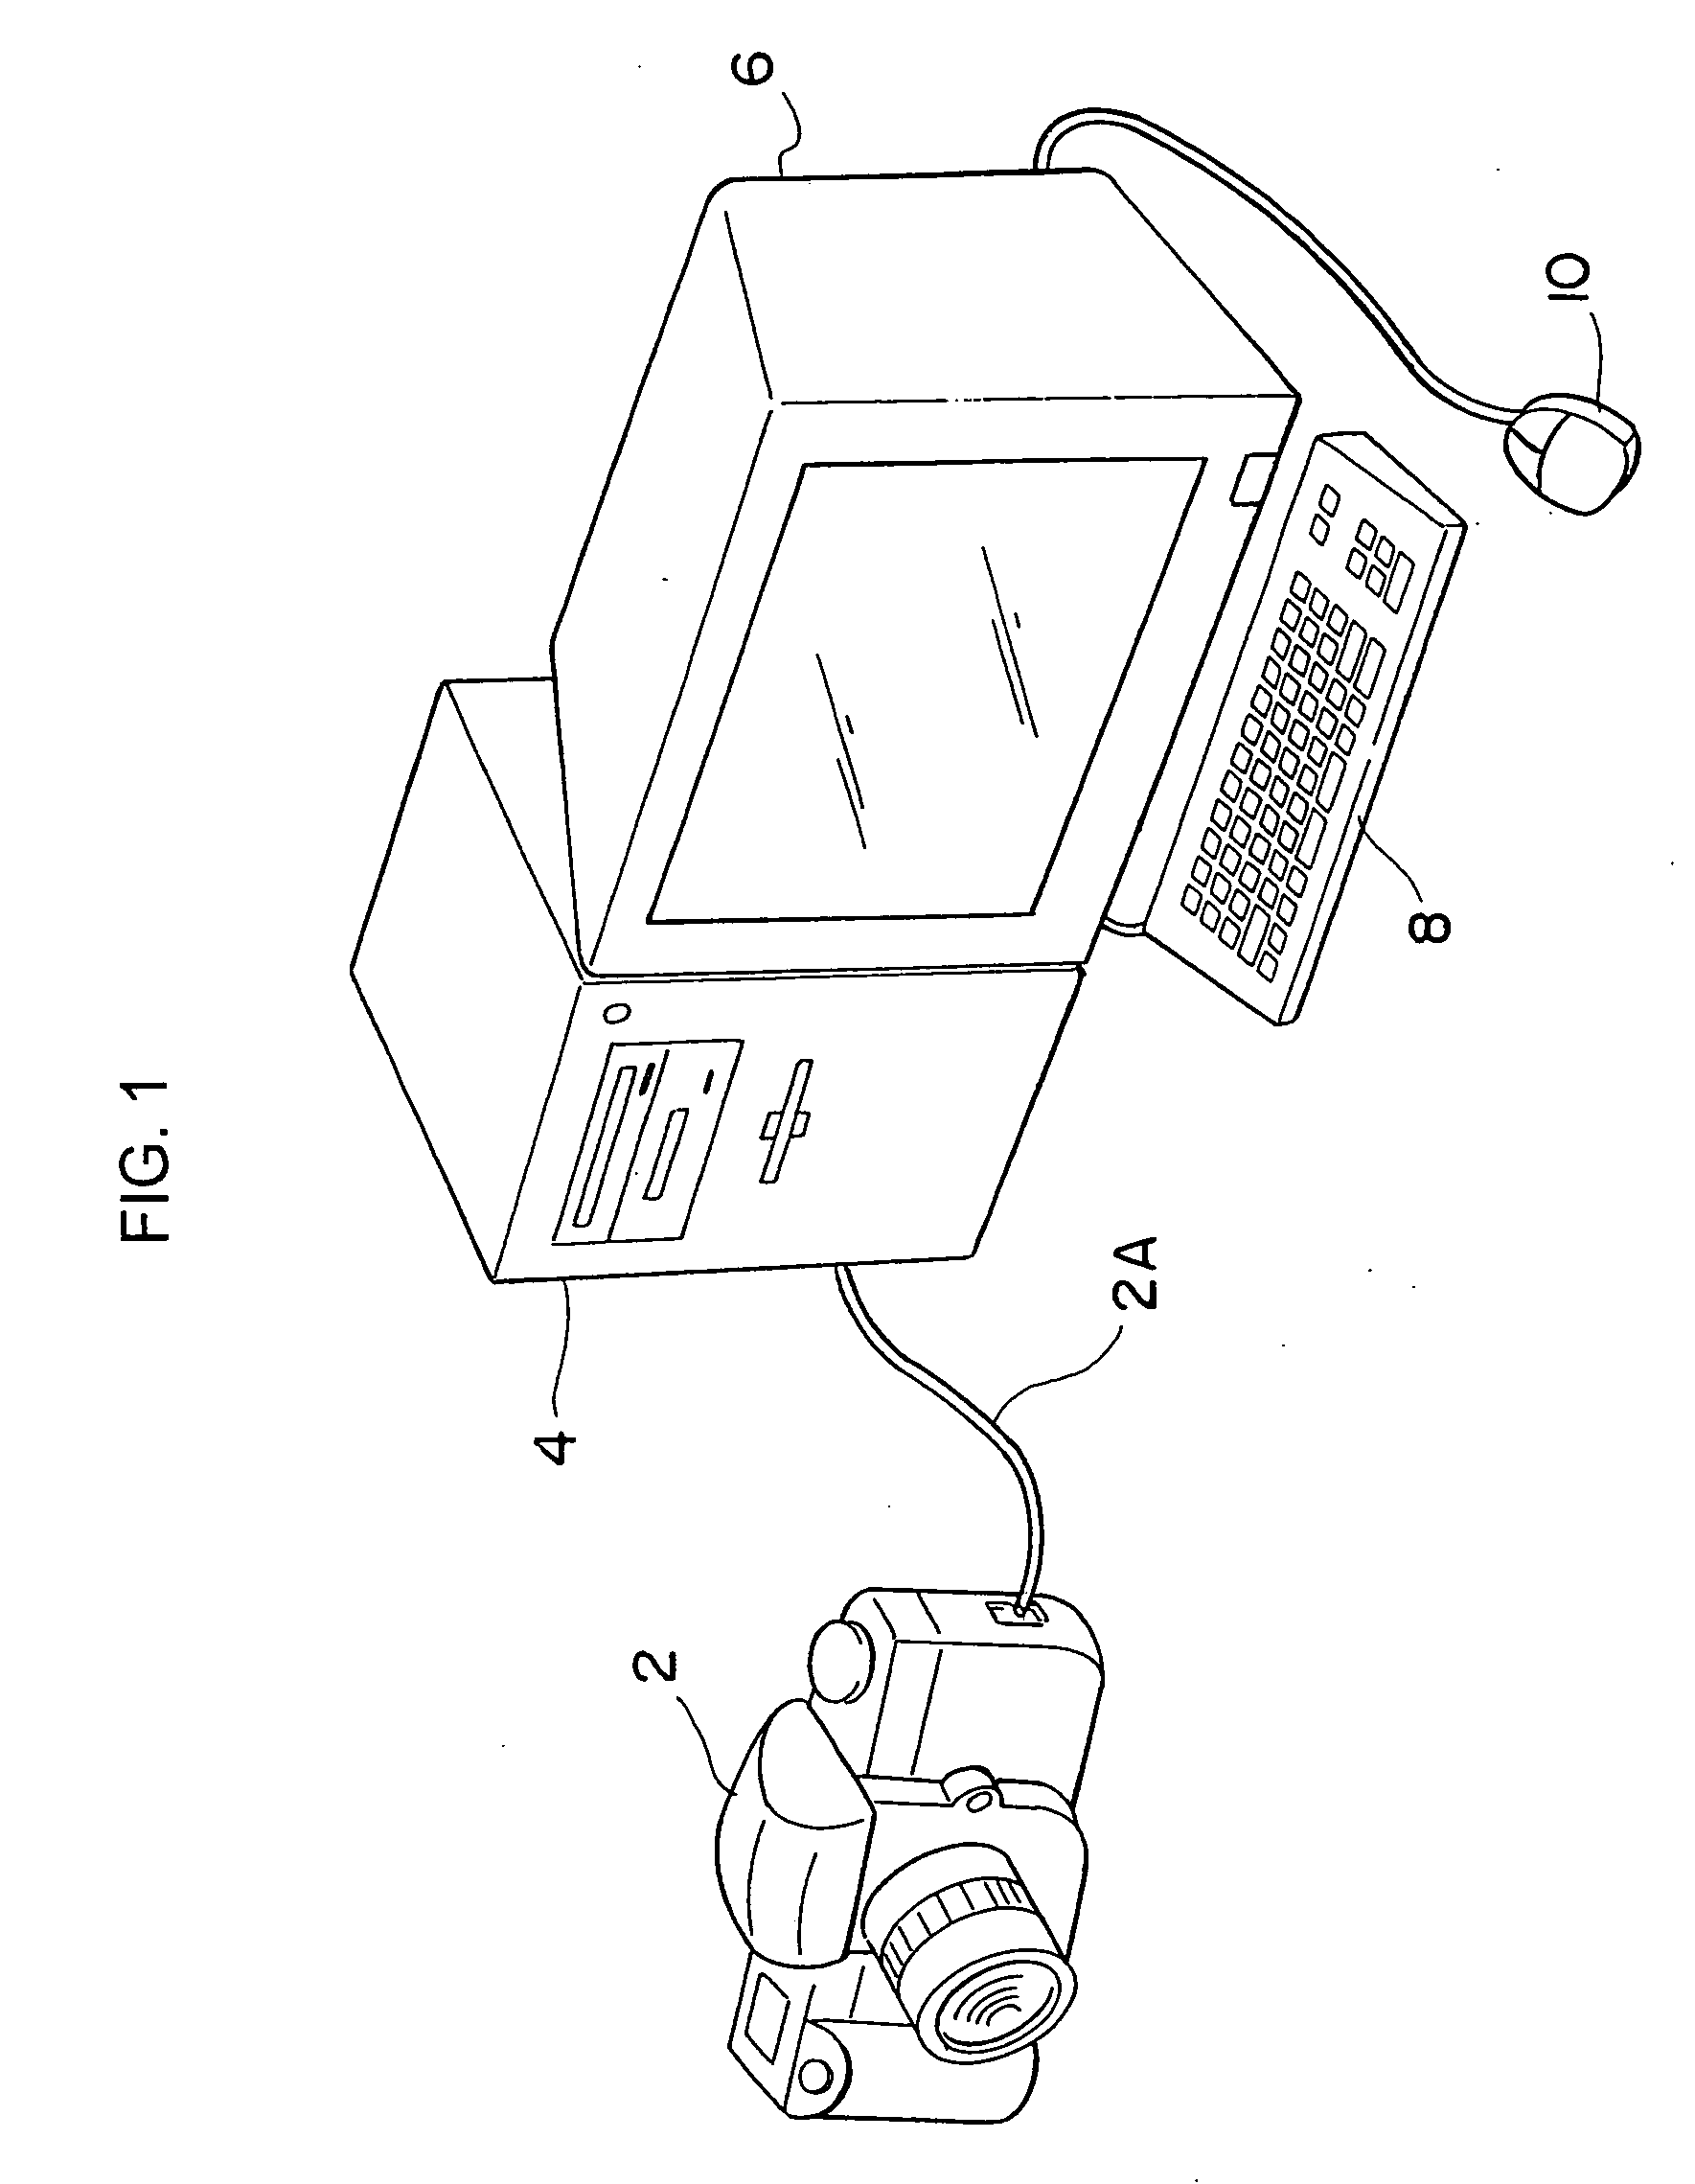 Information processing apparatus, information processing system, image input apparatus, image input system and information exchange method